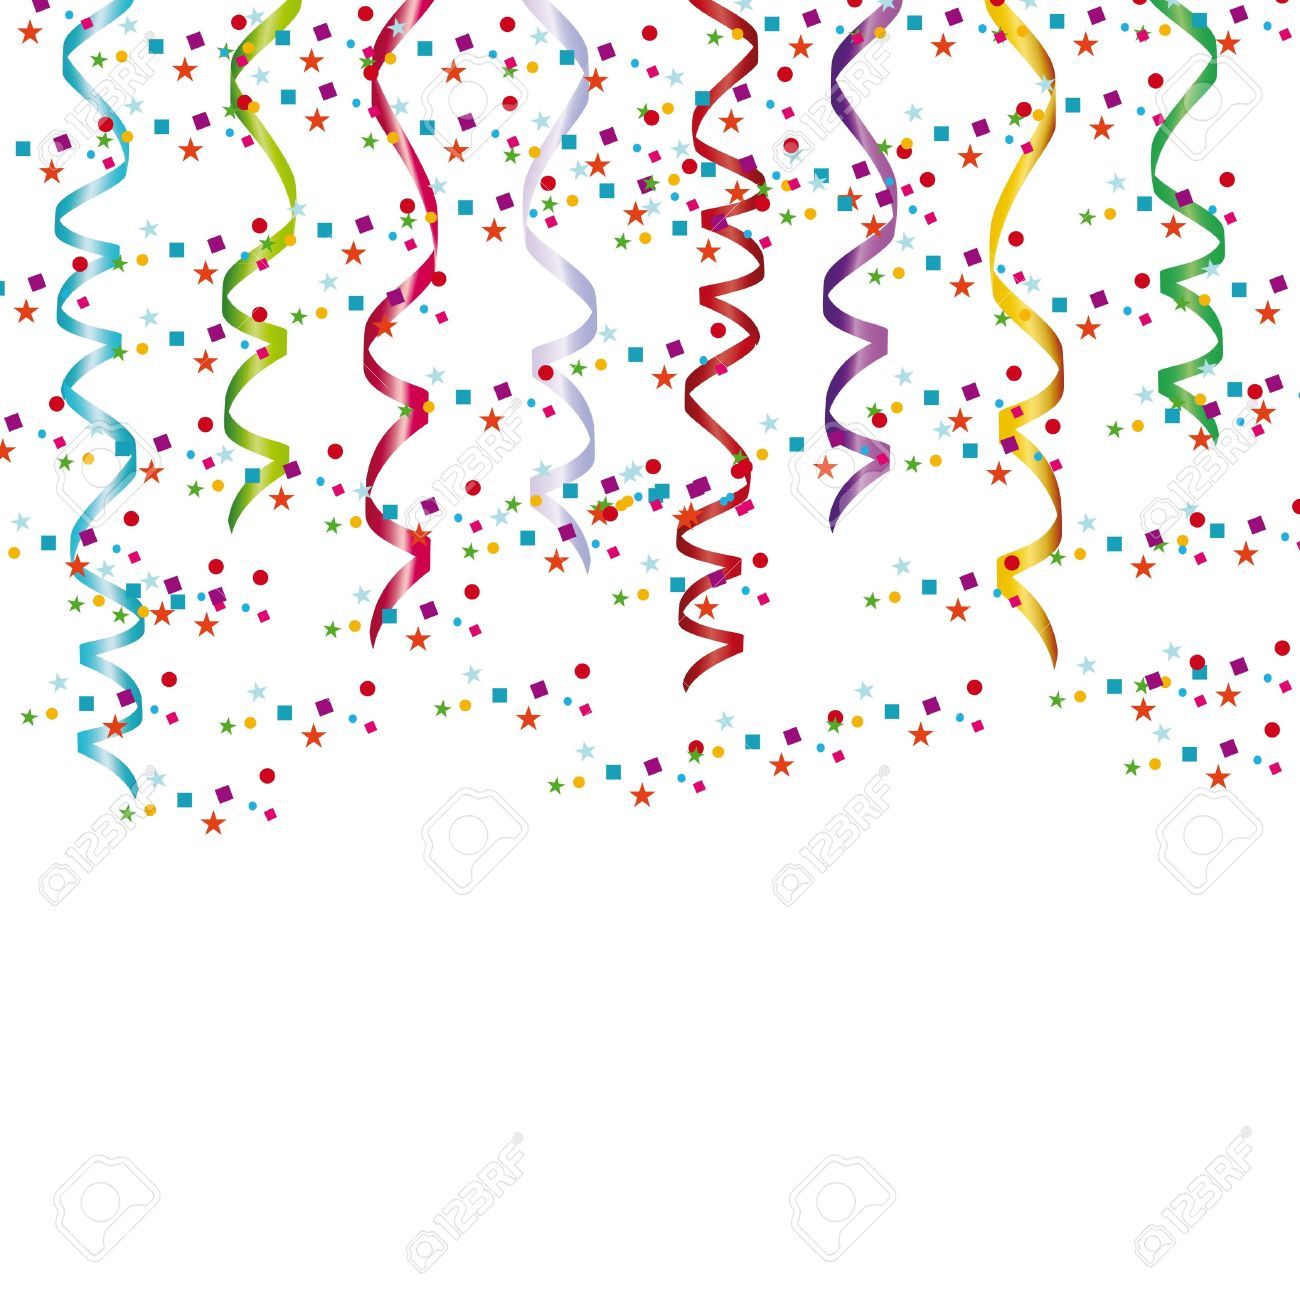 Free clipart party streamers 5 » Clipart Portal.